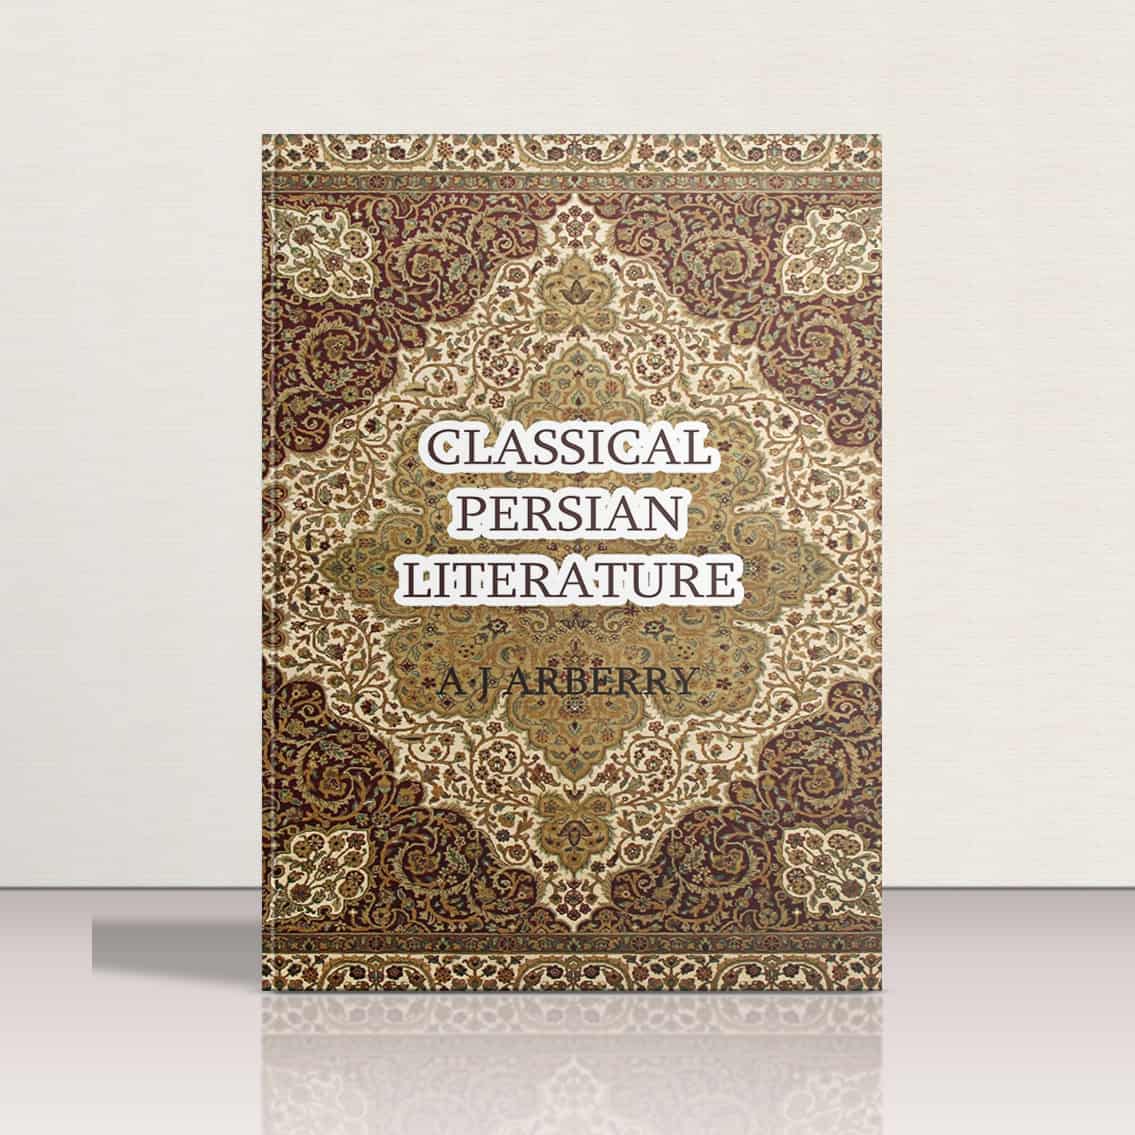 Classical Persian Literature by A.J Arberry